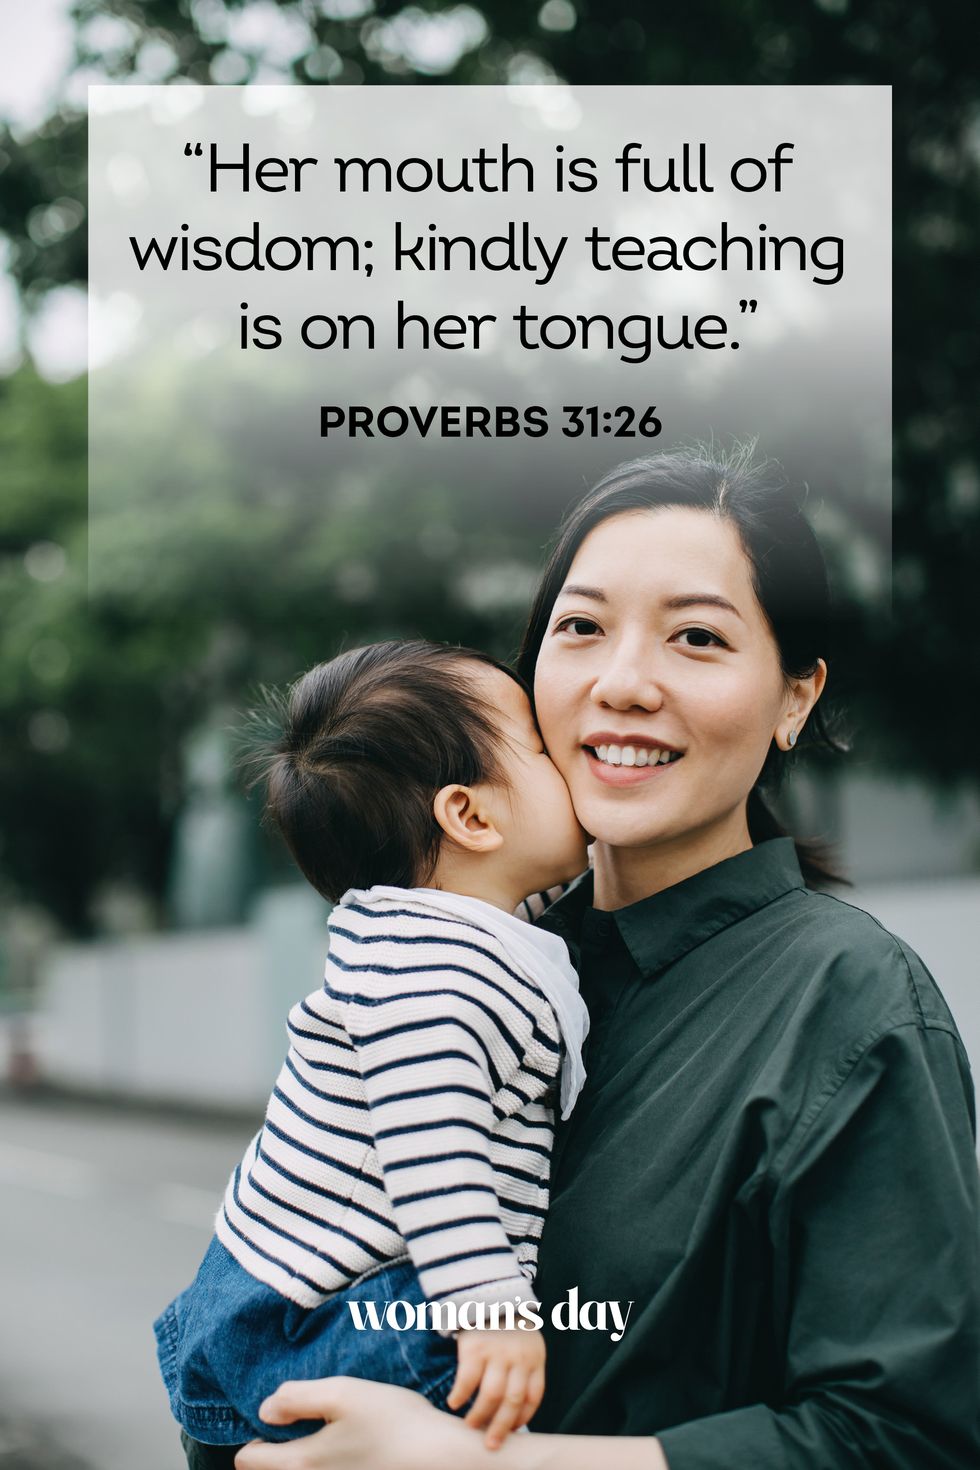 https://hips.hearstapps.com/hmg-prod/images/mother-s-day-bible-verses23-64502ddbce598.jpg?crop=1xw:0.99984xh;center,top&resize=980:*